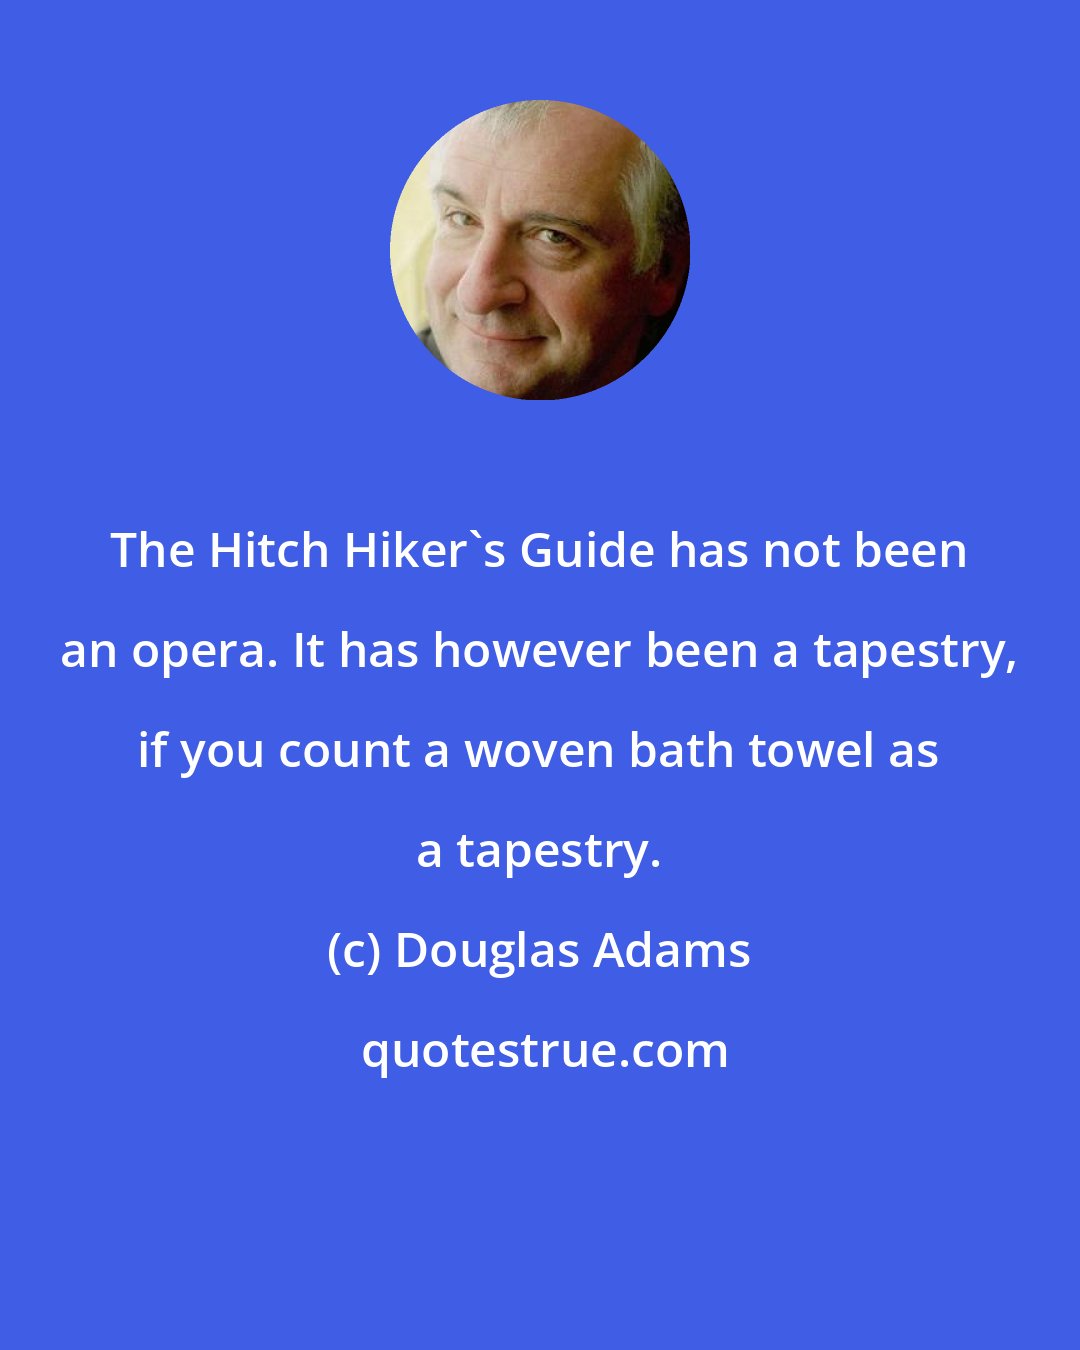 Douglas Adams: The Hitch Hiker's Guide has not been an opera. It has however been a tapestry, if you count a woven bath towel as a tapestry.